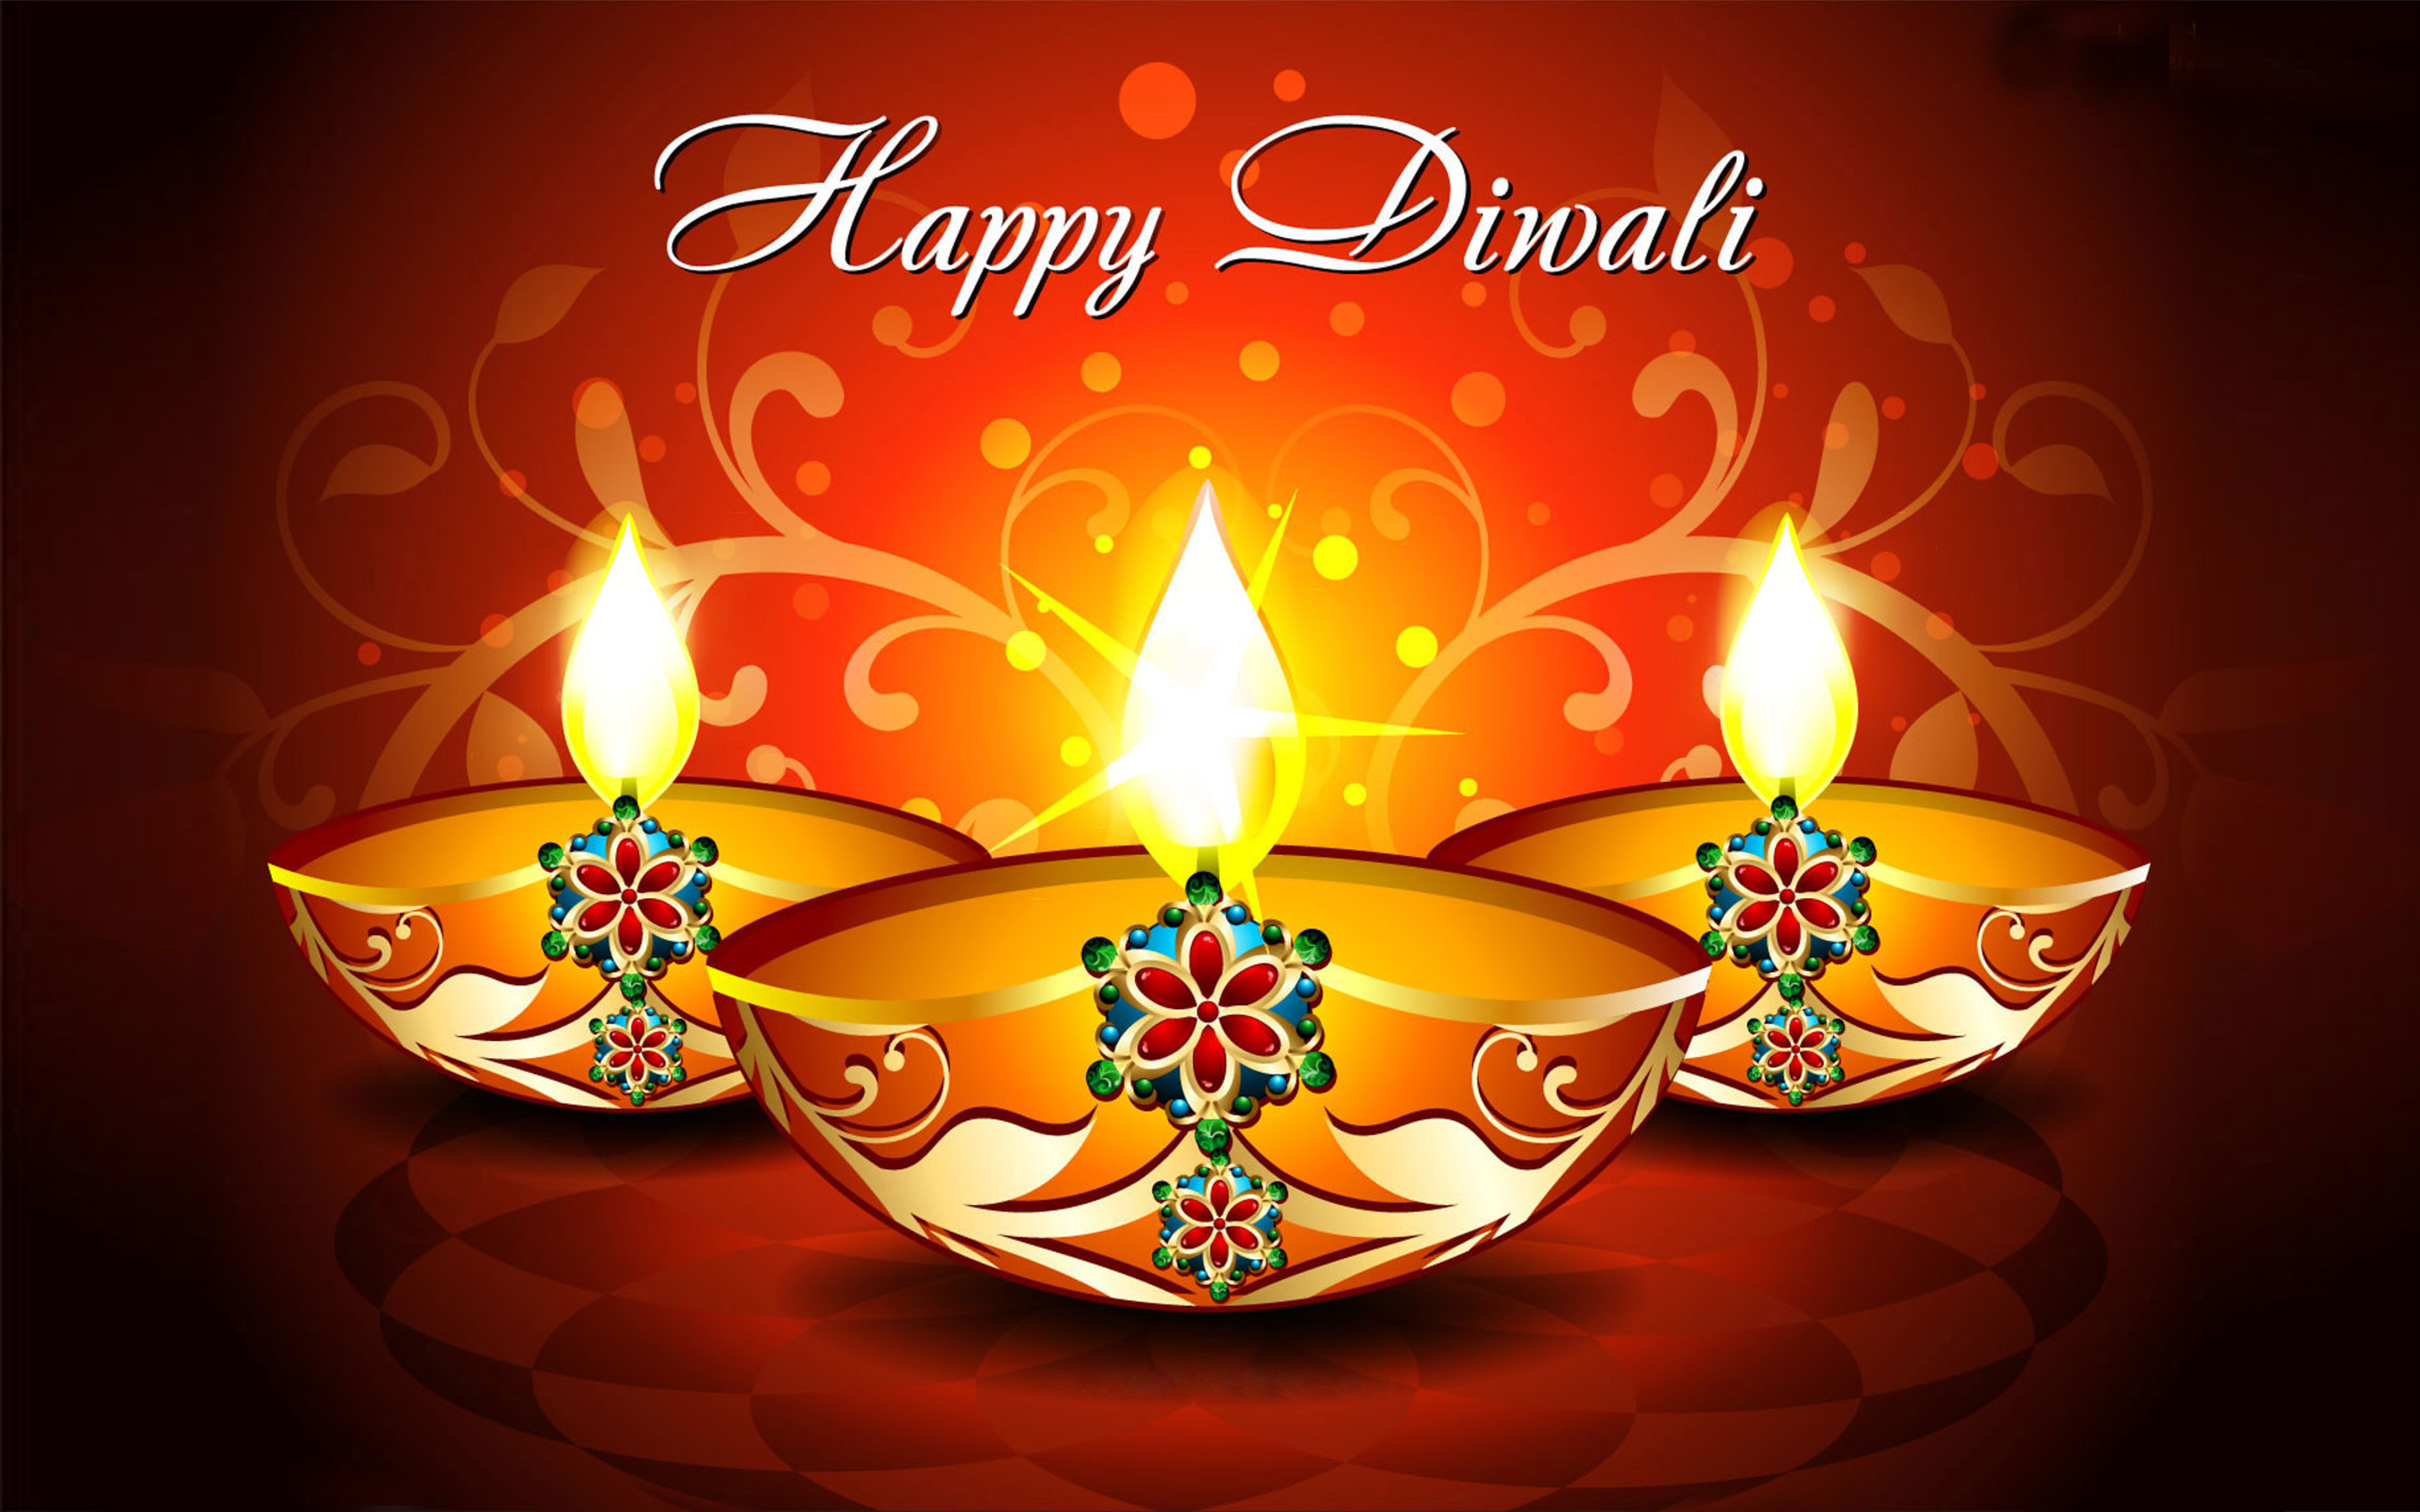 Happy Diwali Messages New Free Pictures Wallpaper For Desktop